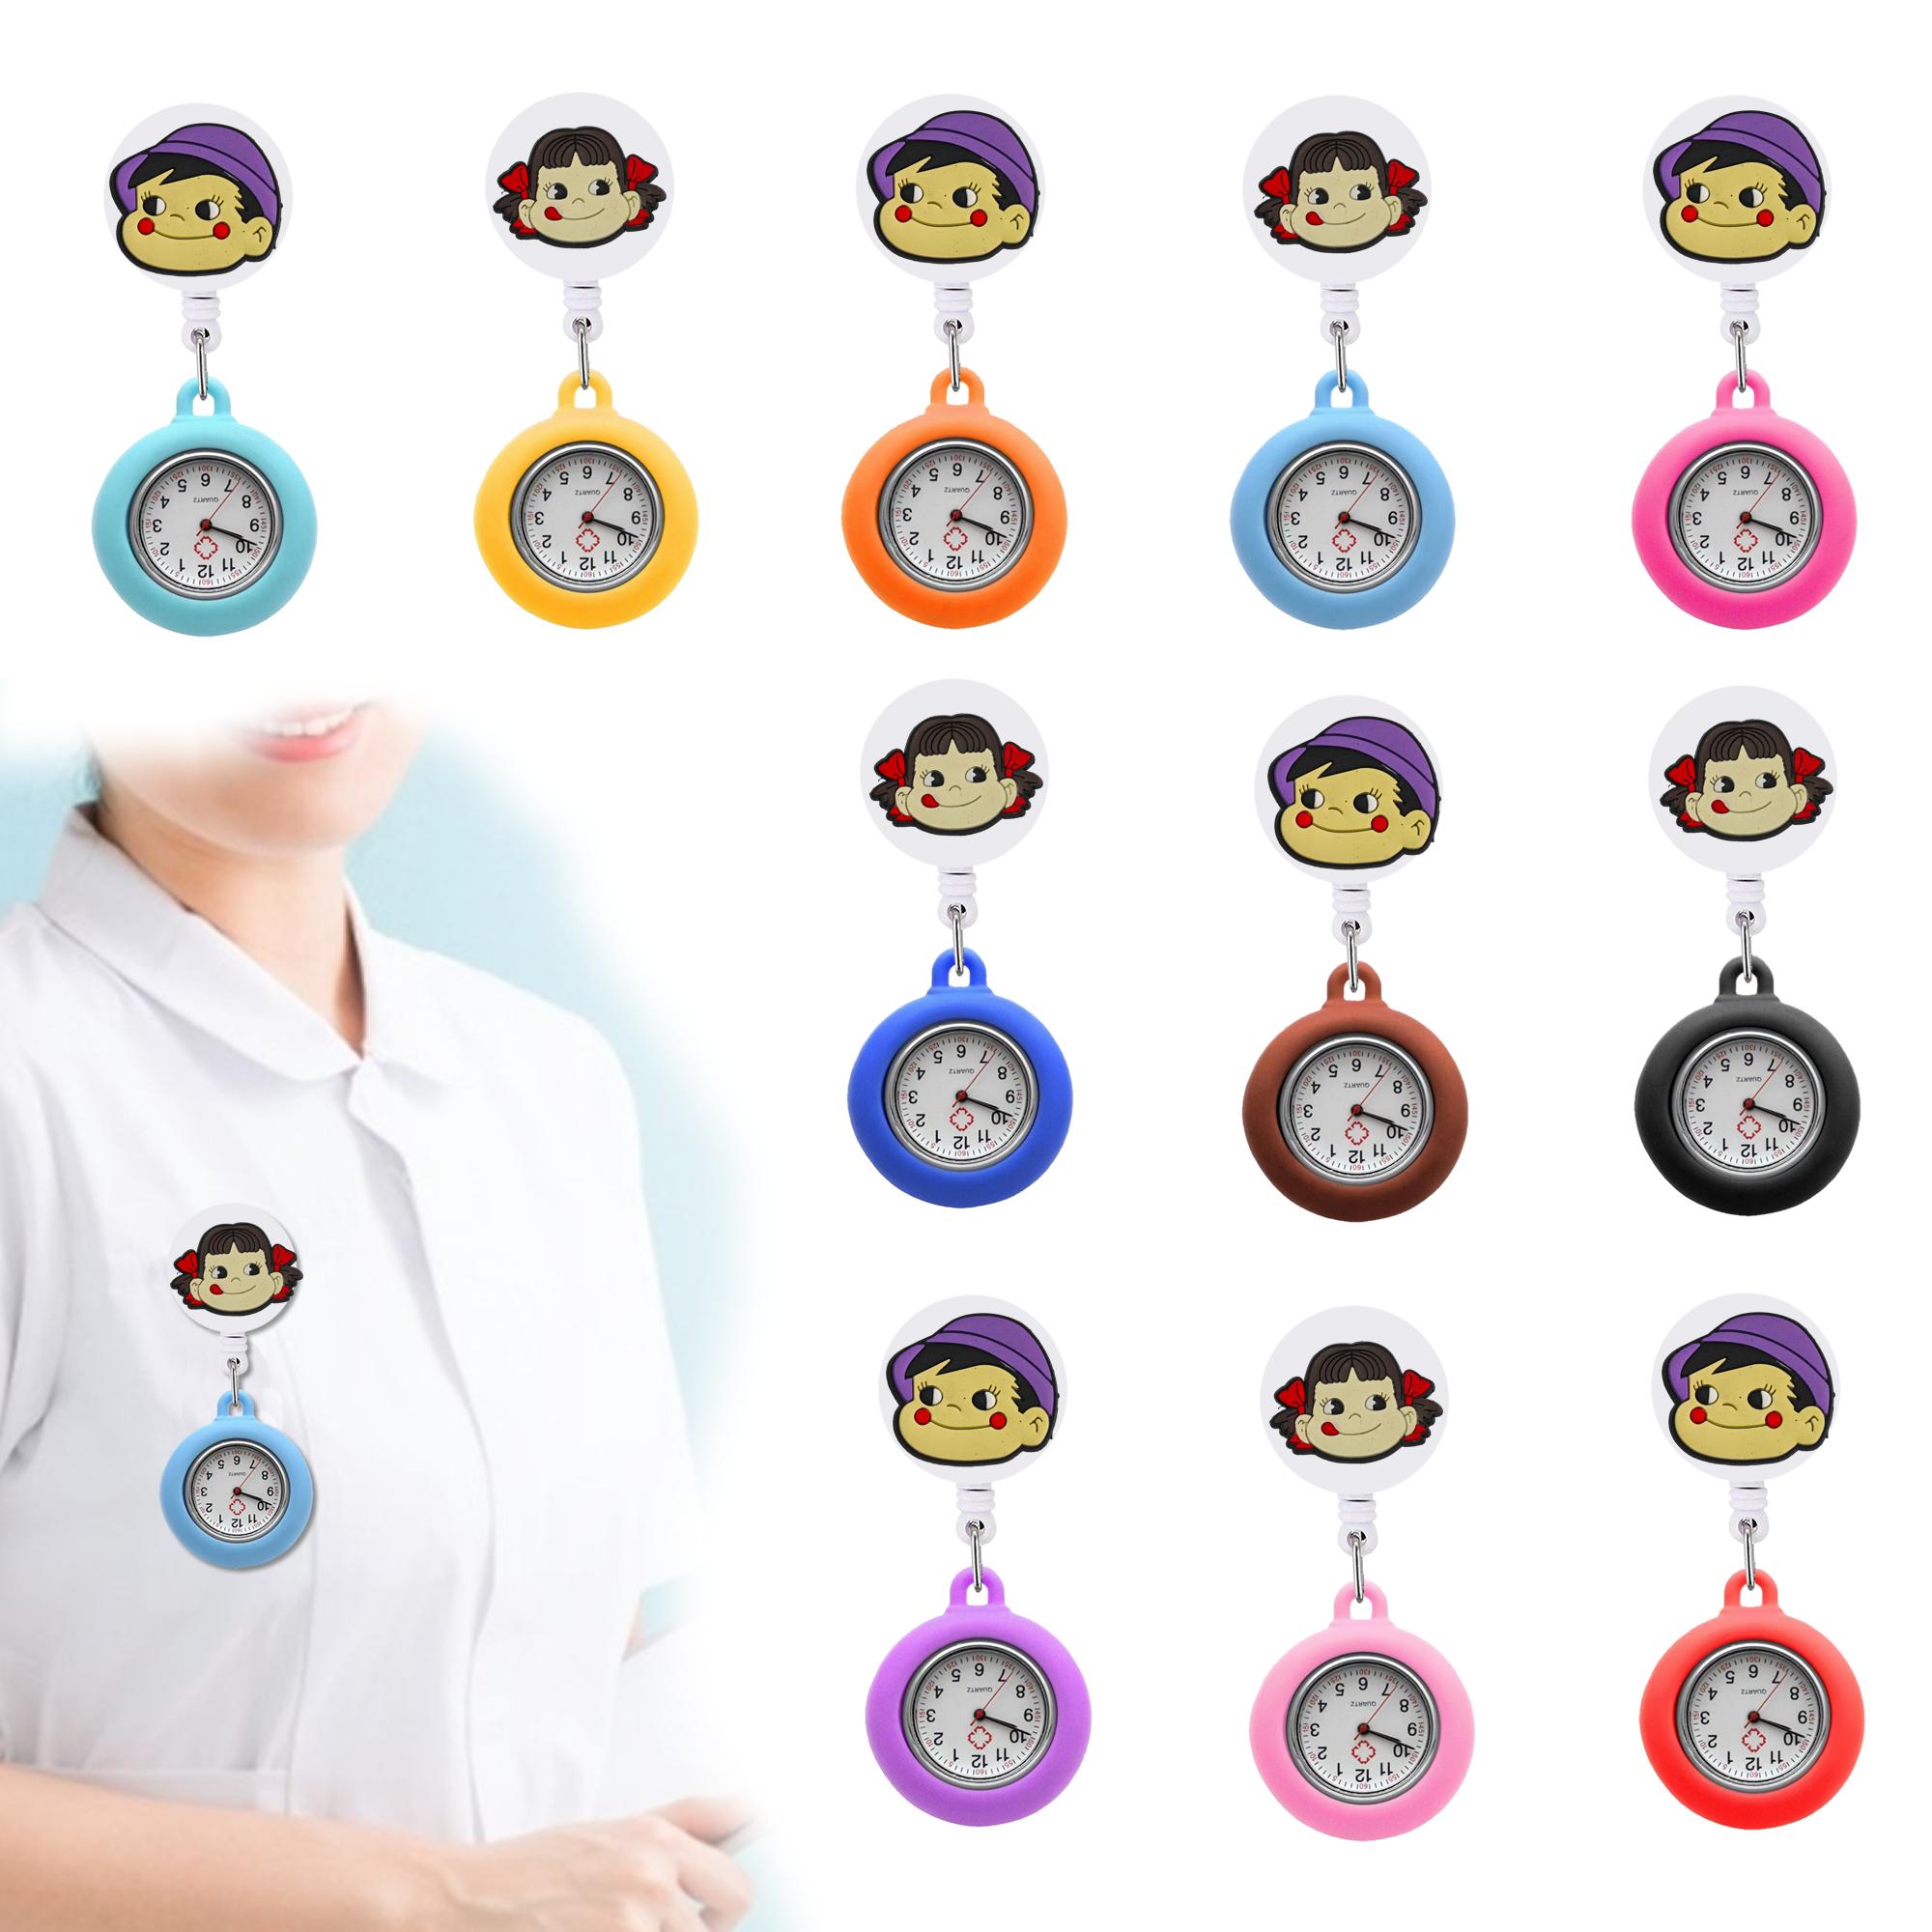 Other Fashion Accessories No Two Families Clip Pocket Watches Nurse Quartz Watch Brooch Pin On With Secondhand Stethoscope Lapel Fob Otdhl